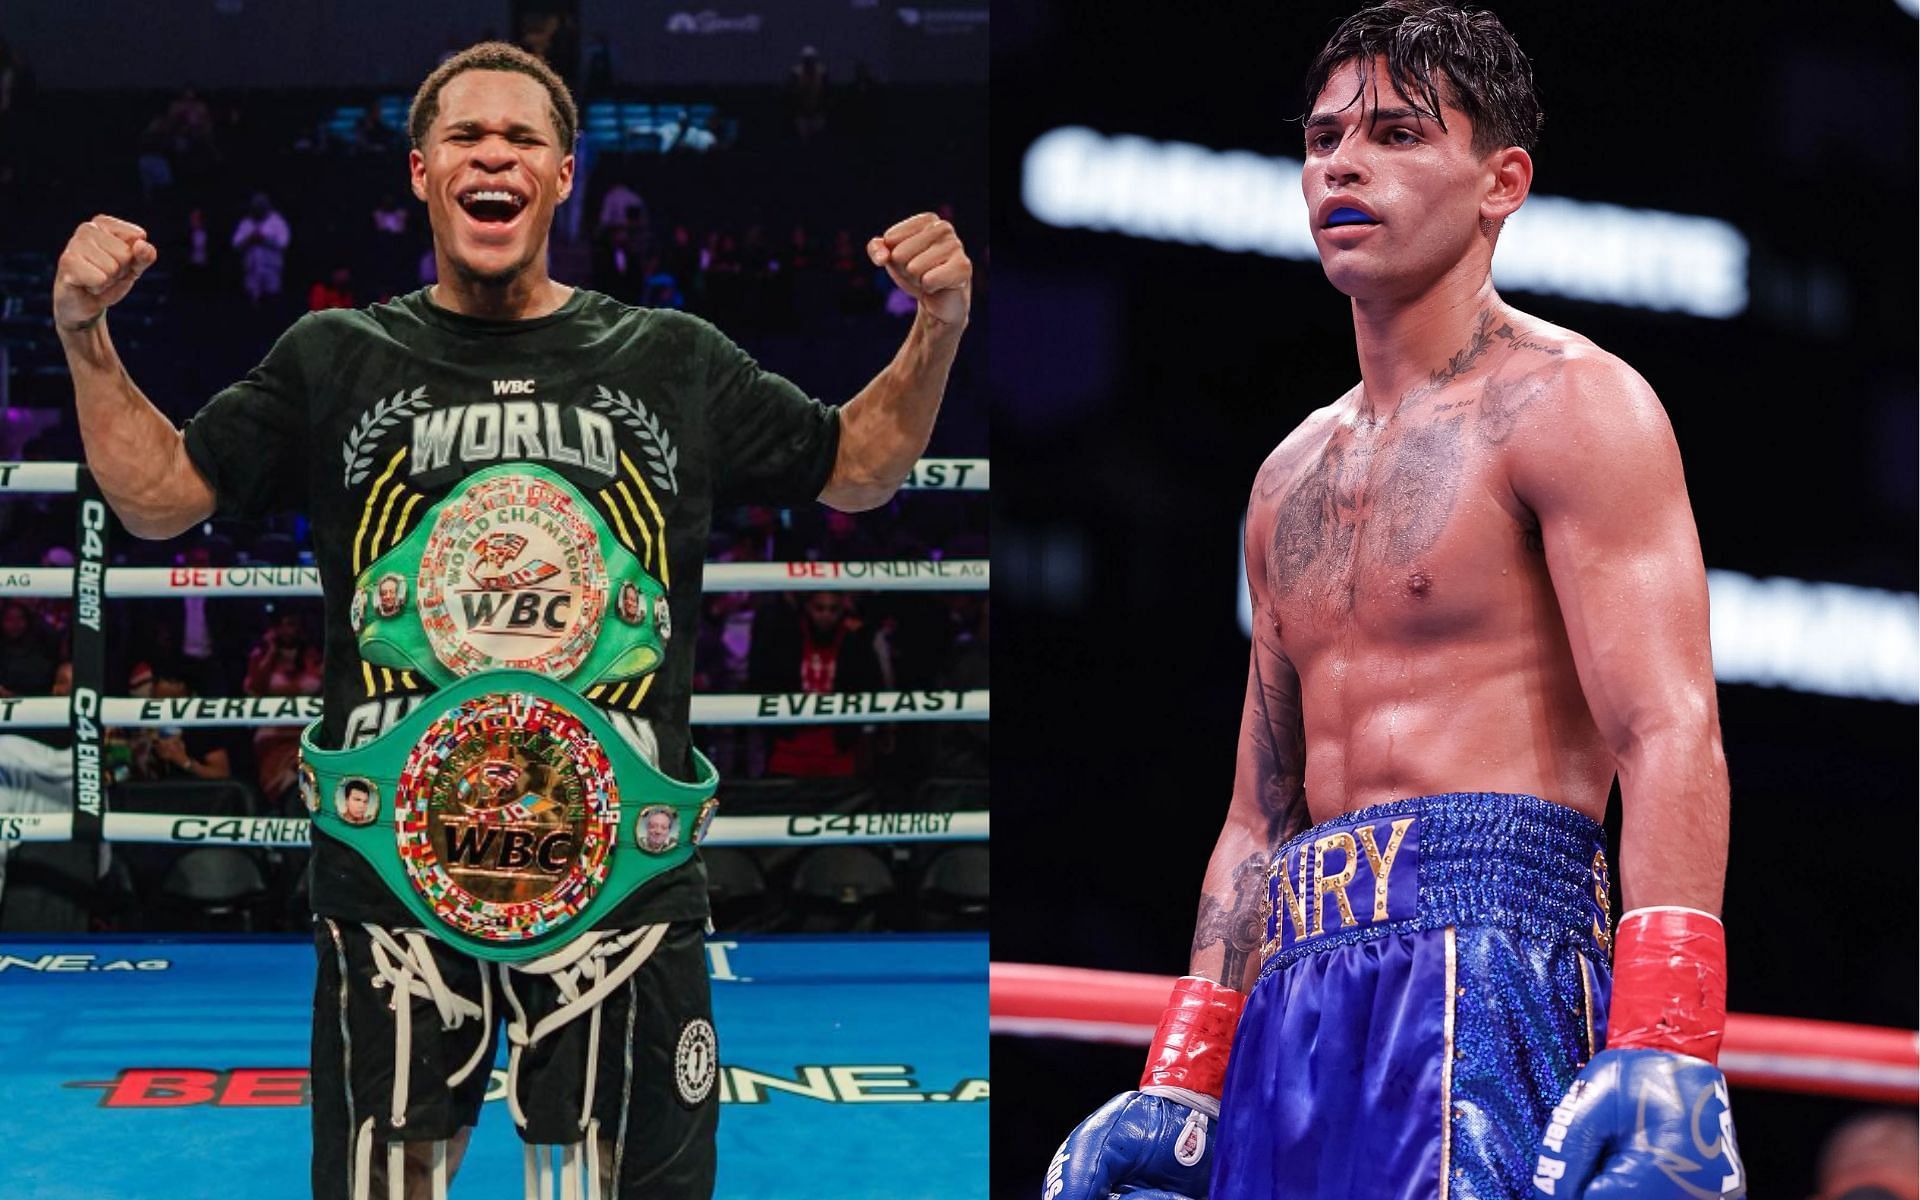 Devin Haney (left) and Ryan Garcia (right) reportedly agree to a clash for the WBC super lightweight title [Images Courtesy: @GettyImages and @realdevinhaney on Instagram]